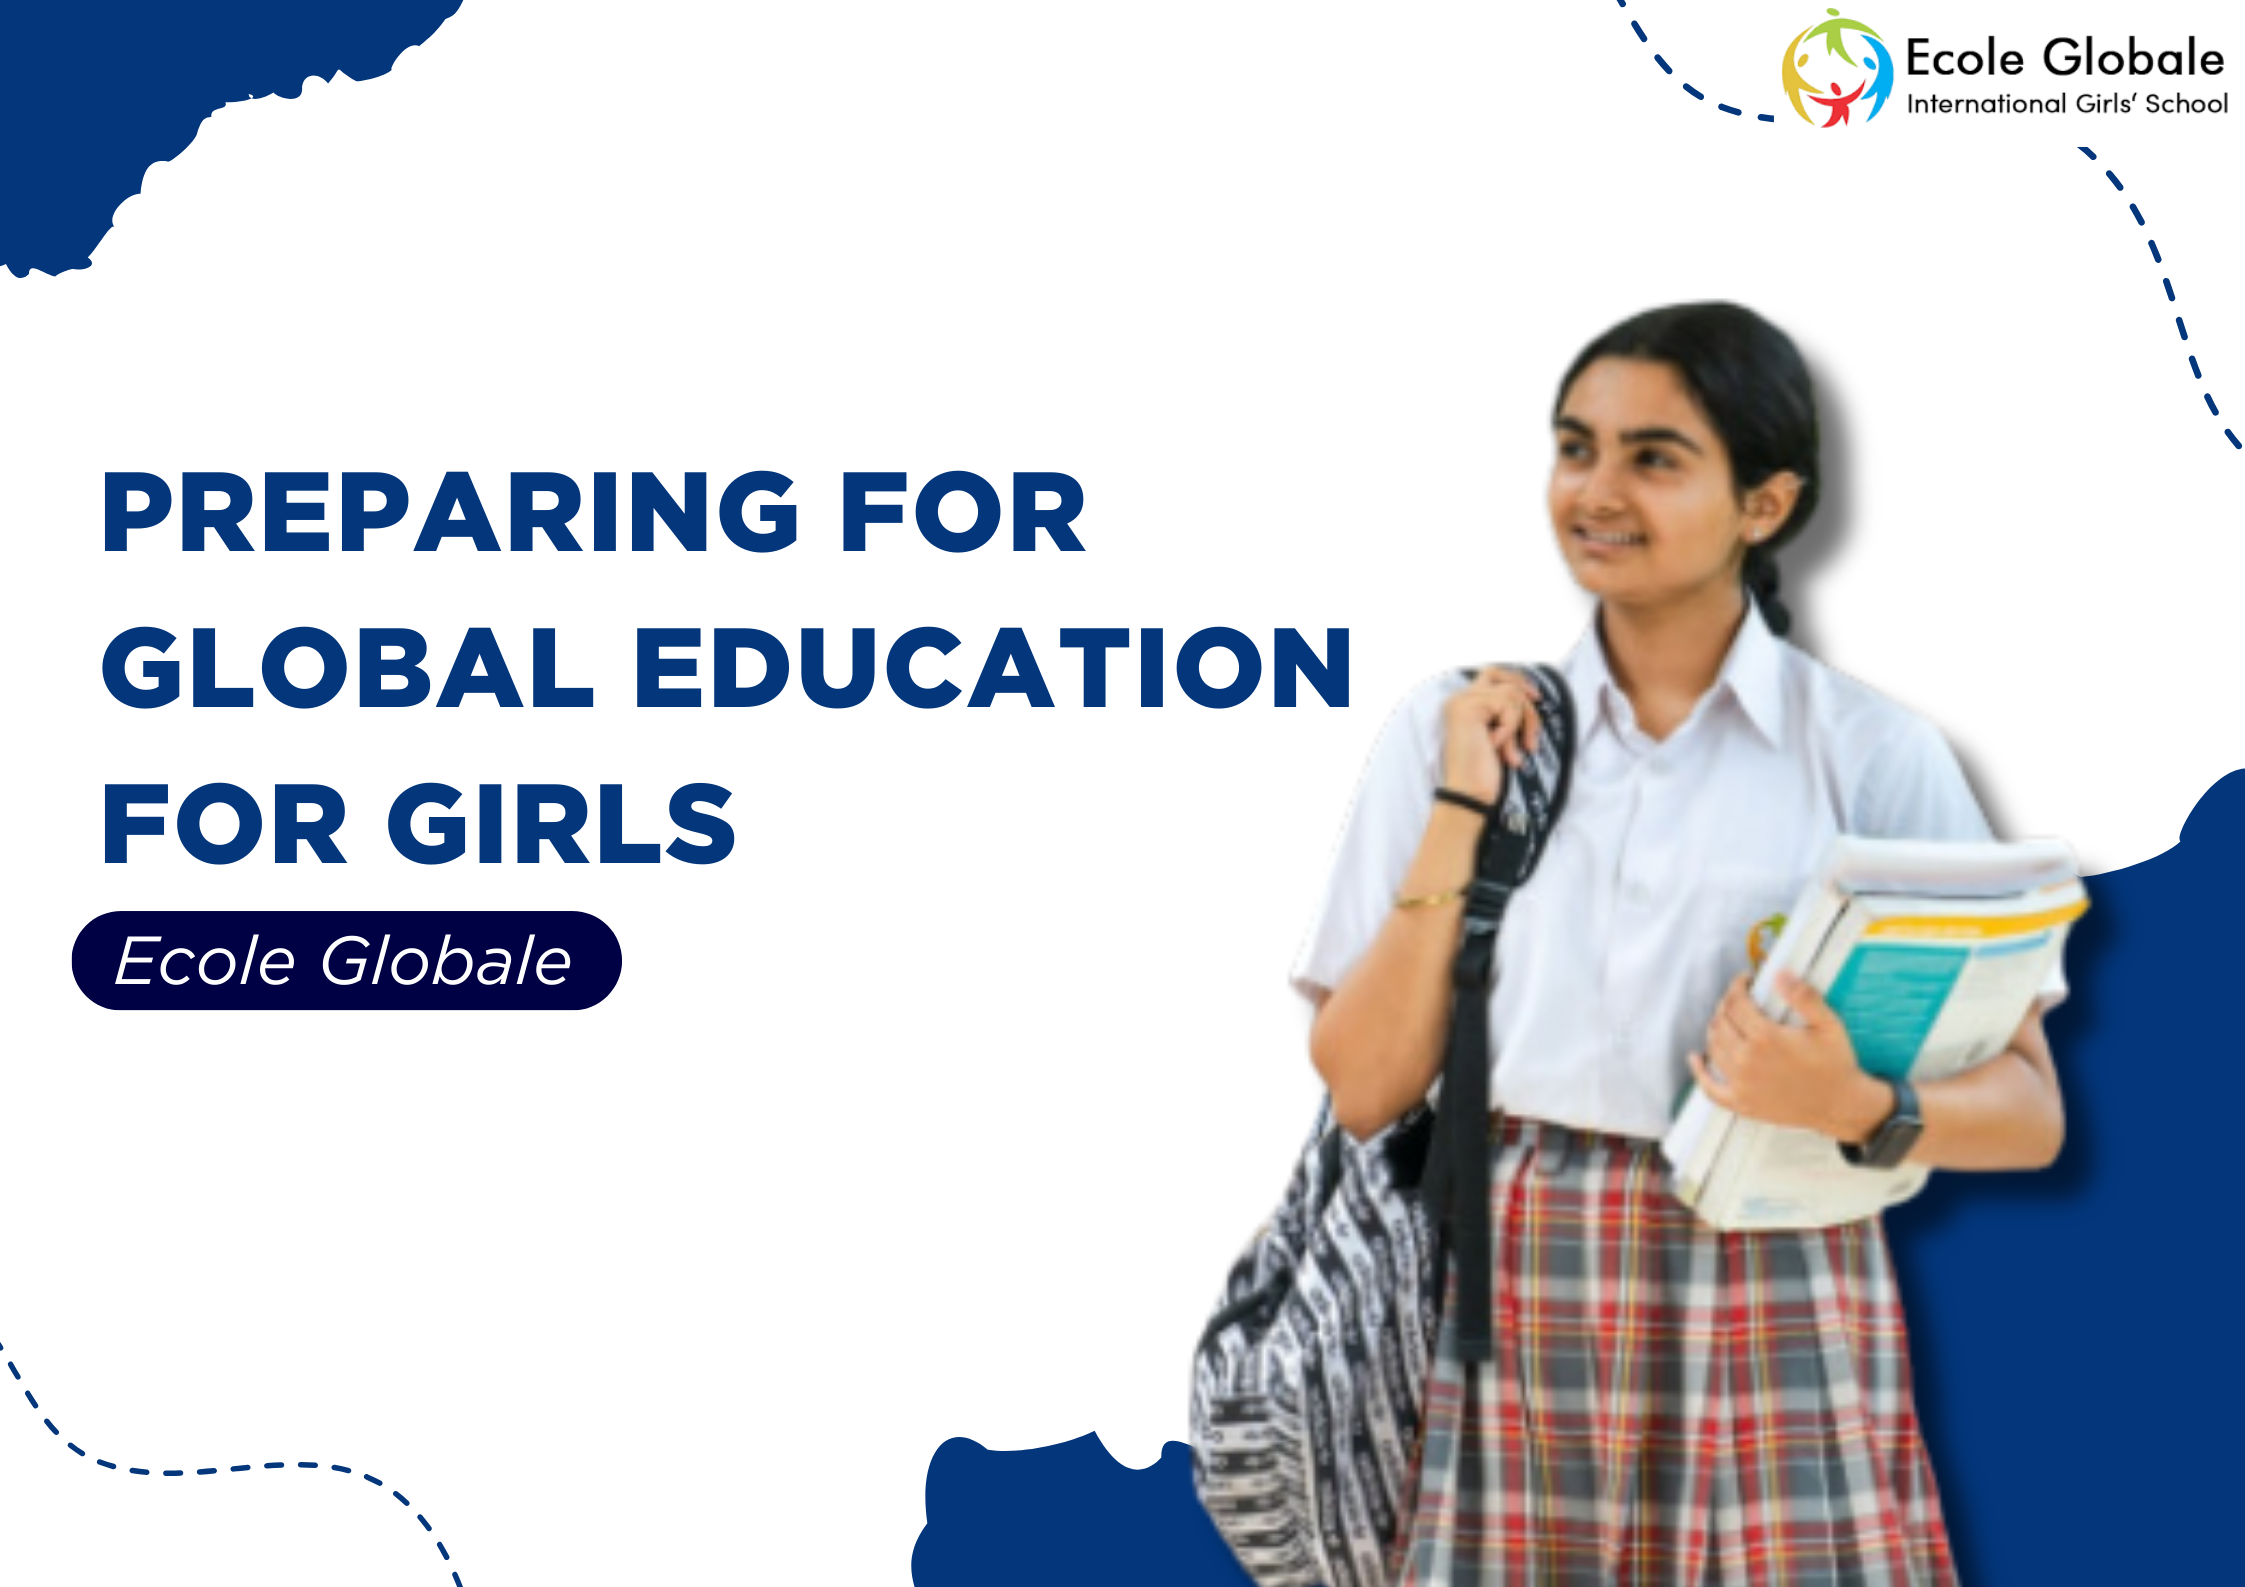 You are currently viewing Preparing for global education for girls at Ecole Globale